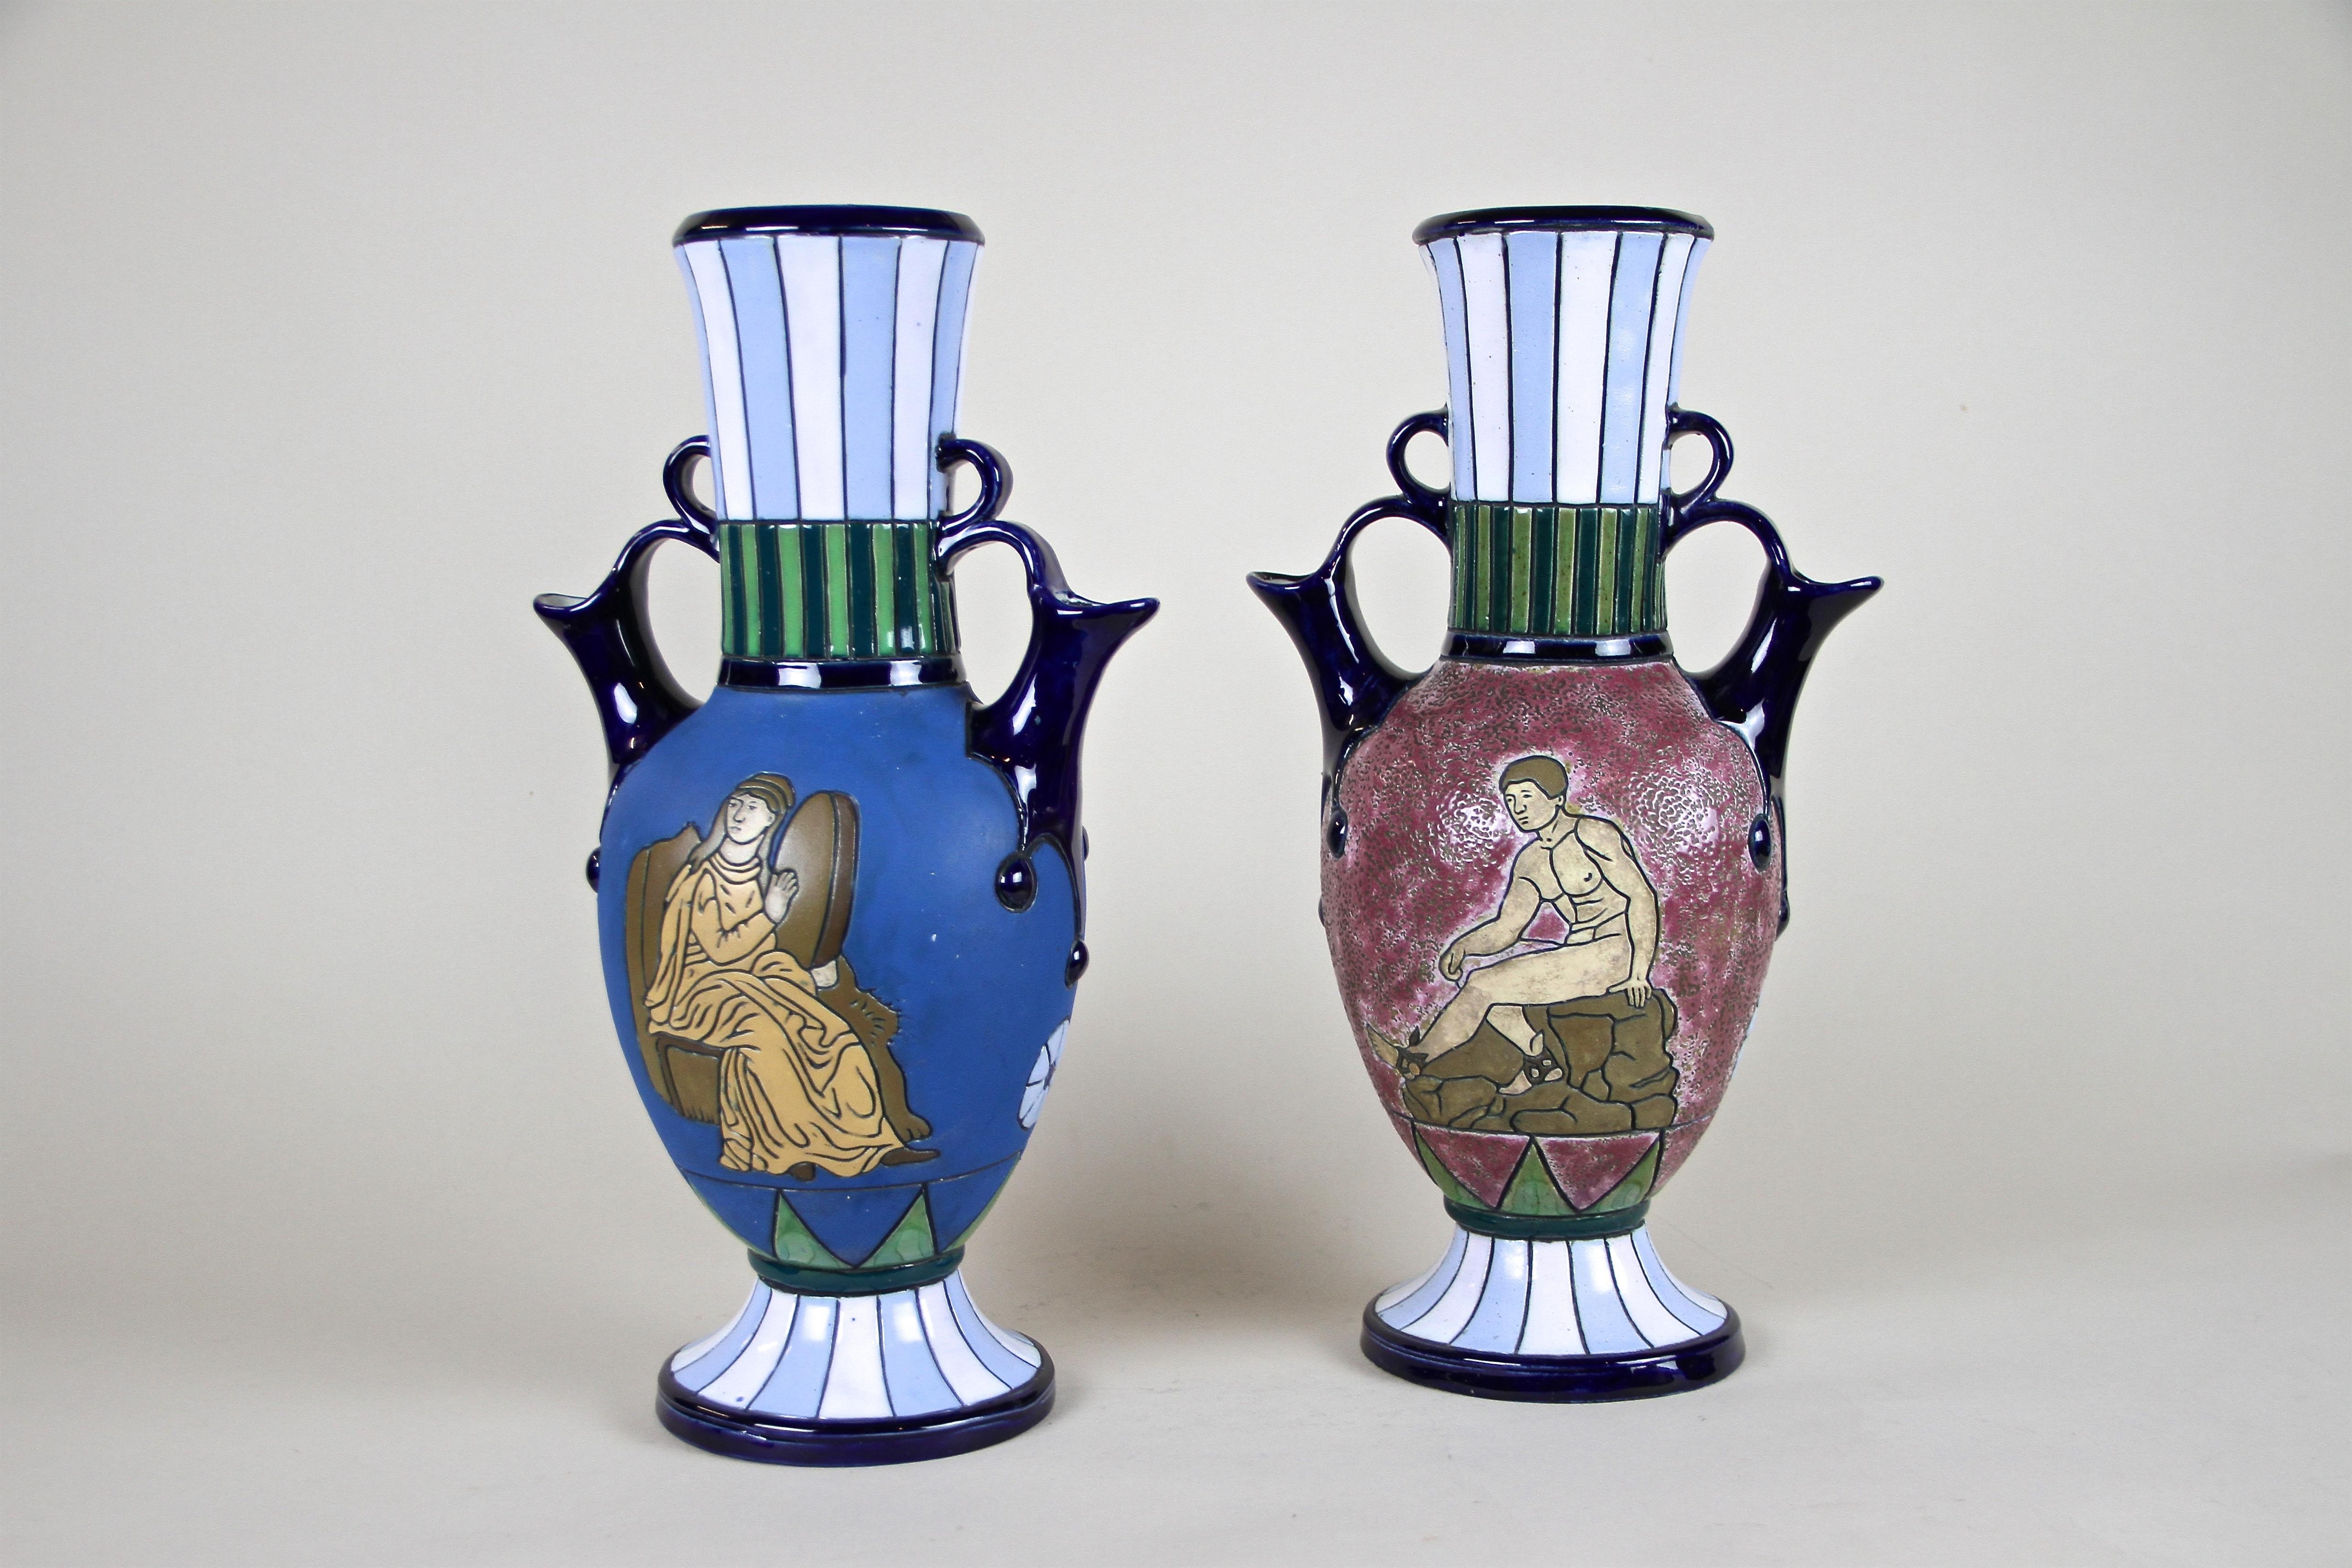 Unusual pair of Majolica Vases handcrafted in the Art Deco period around 1920 by the famous company of Amphora Czechoslovakia. The beautiful amphora-shaped bodies shows a fantastic relief design with great looking polychrome enameled pattern. Eye